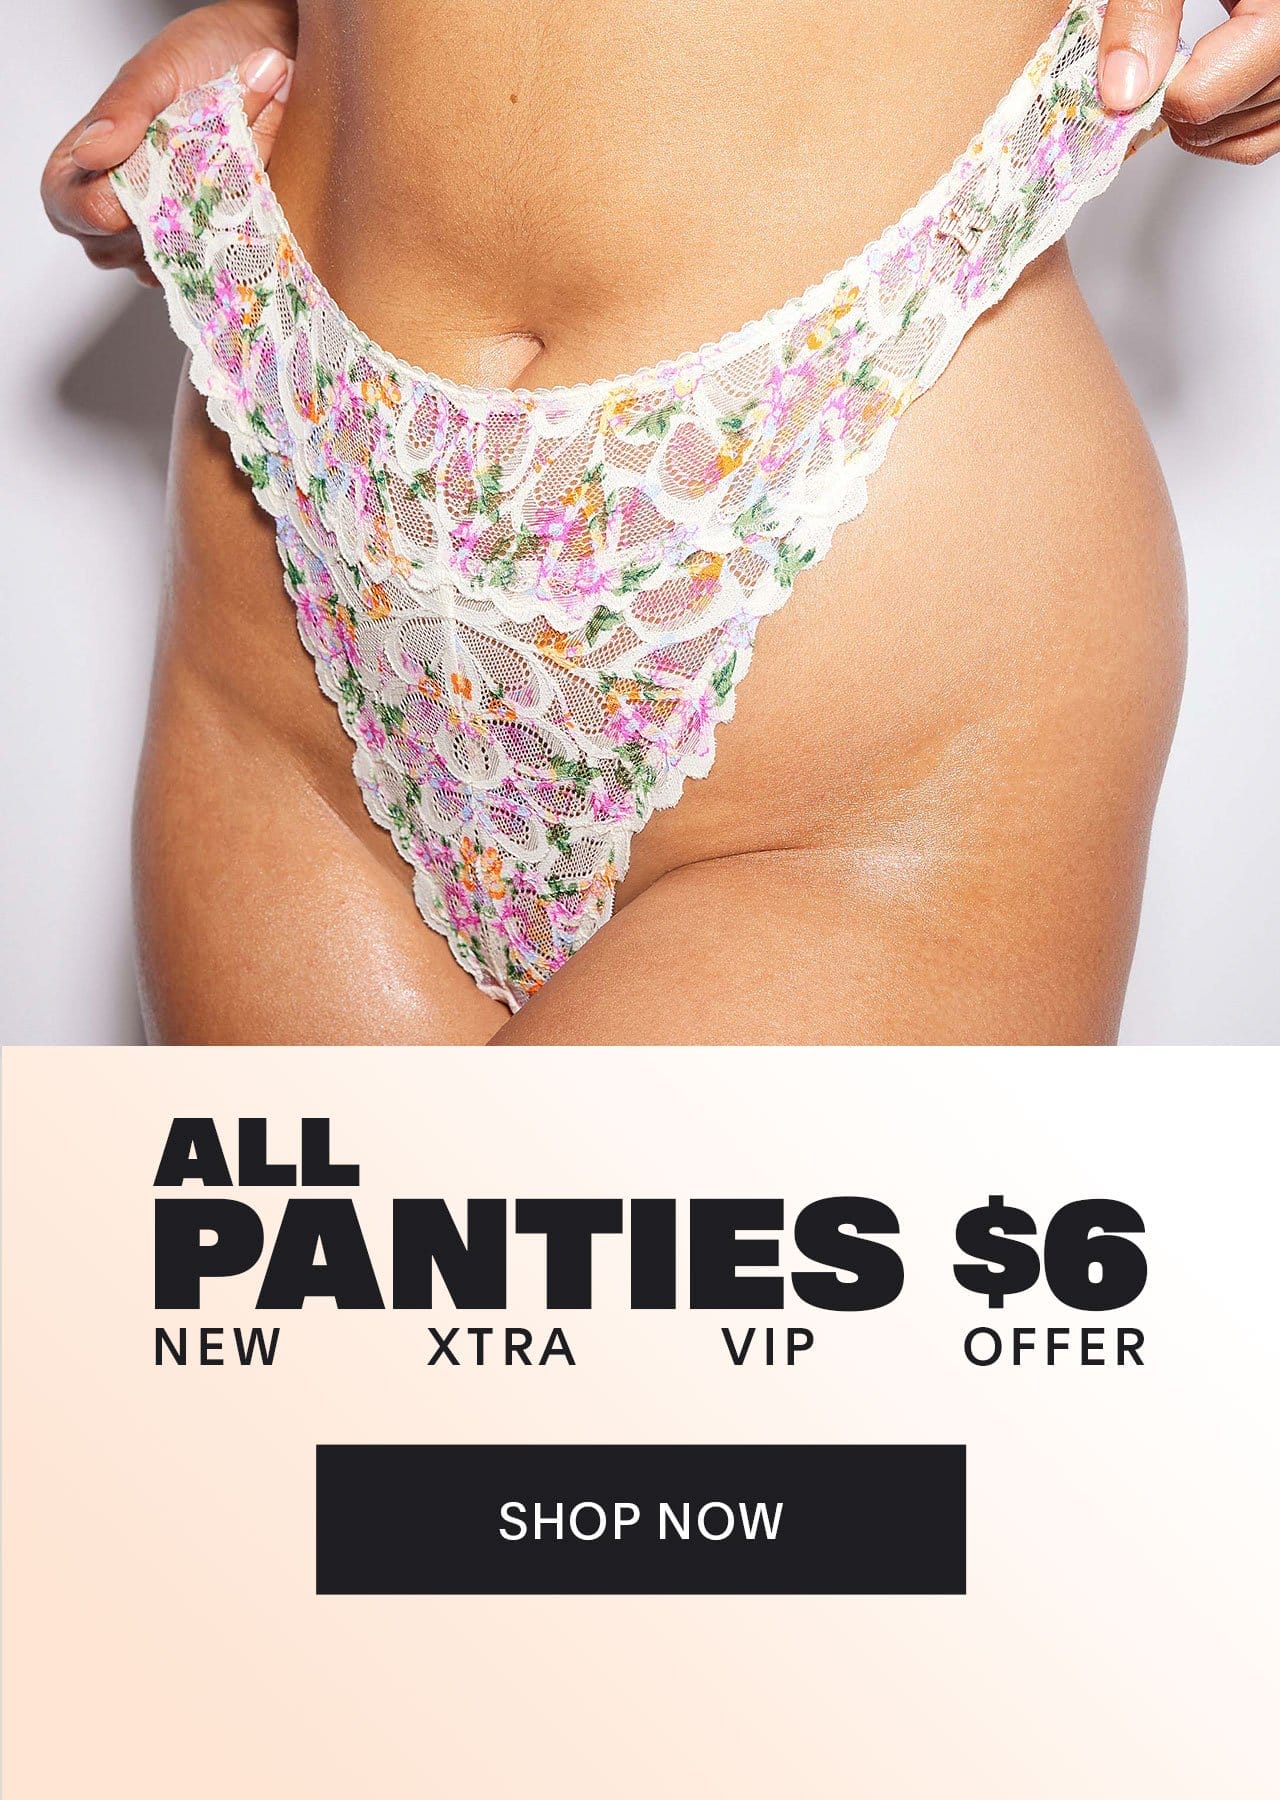 New Xtra VIP Offer ALL PANTIES \\$6!